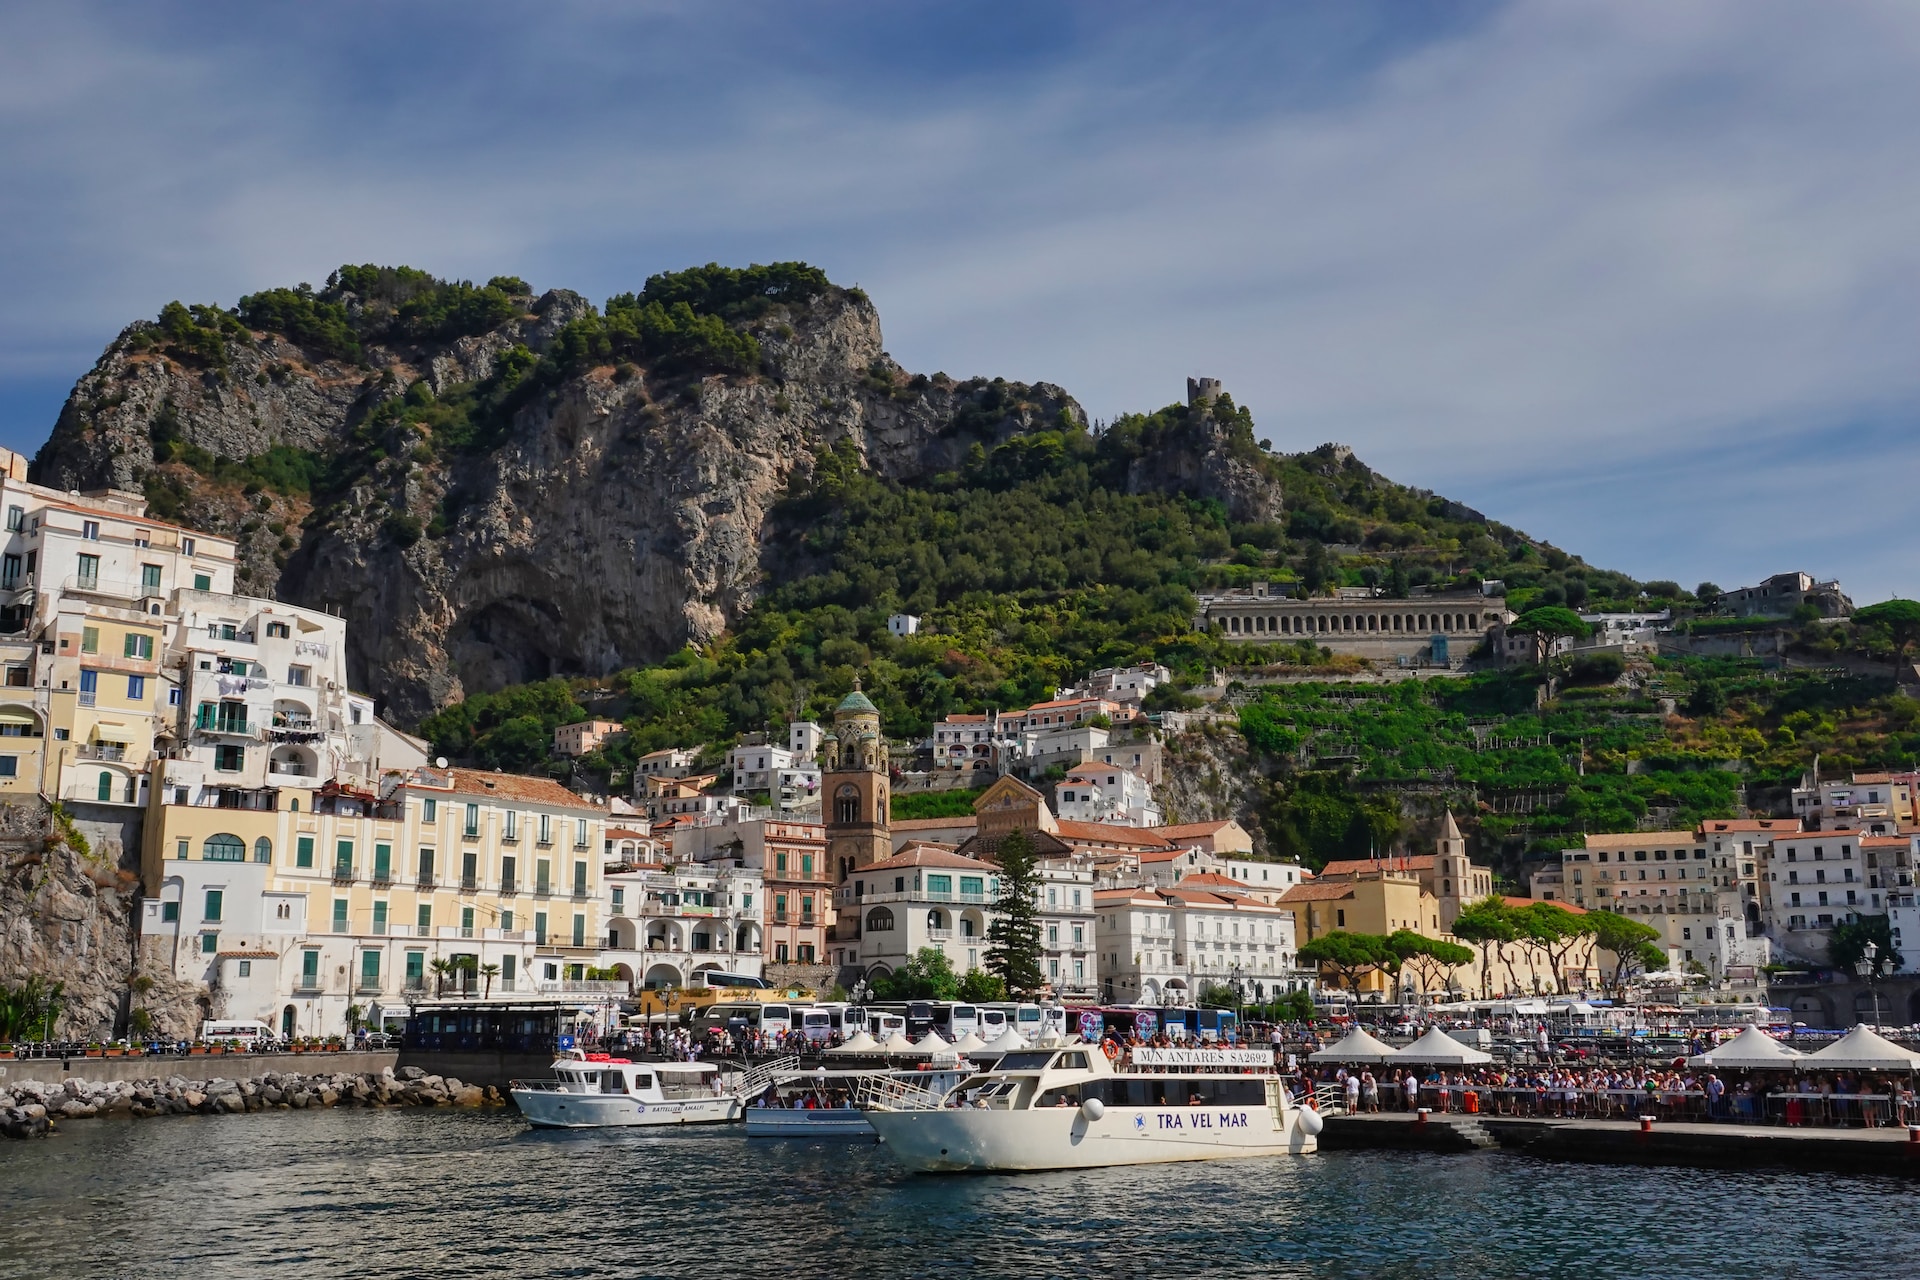 View of the Amalfi port